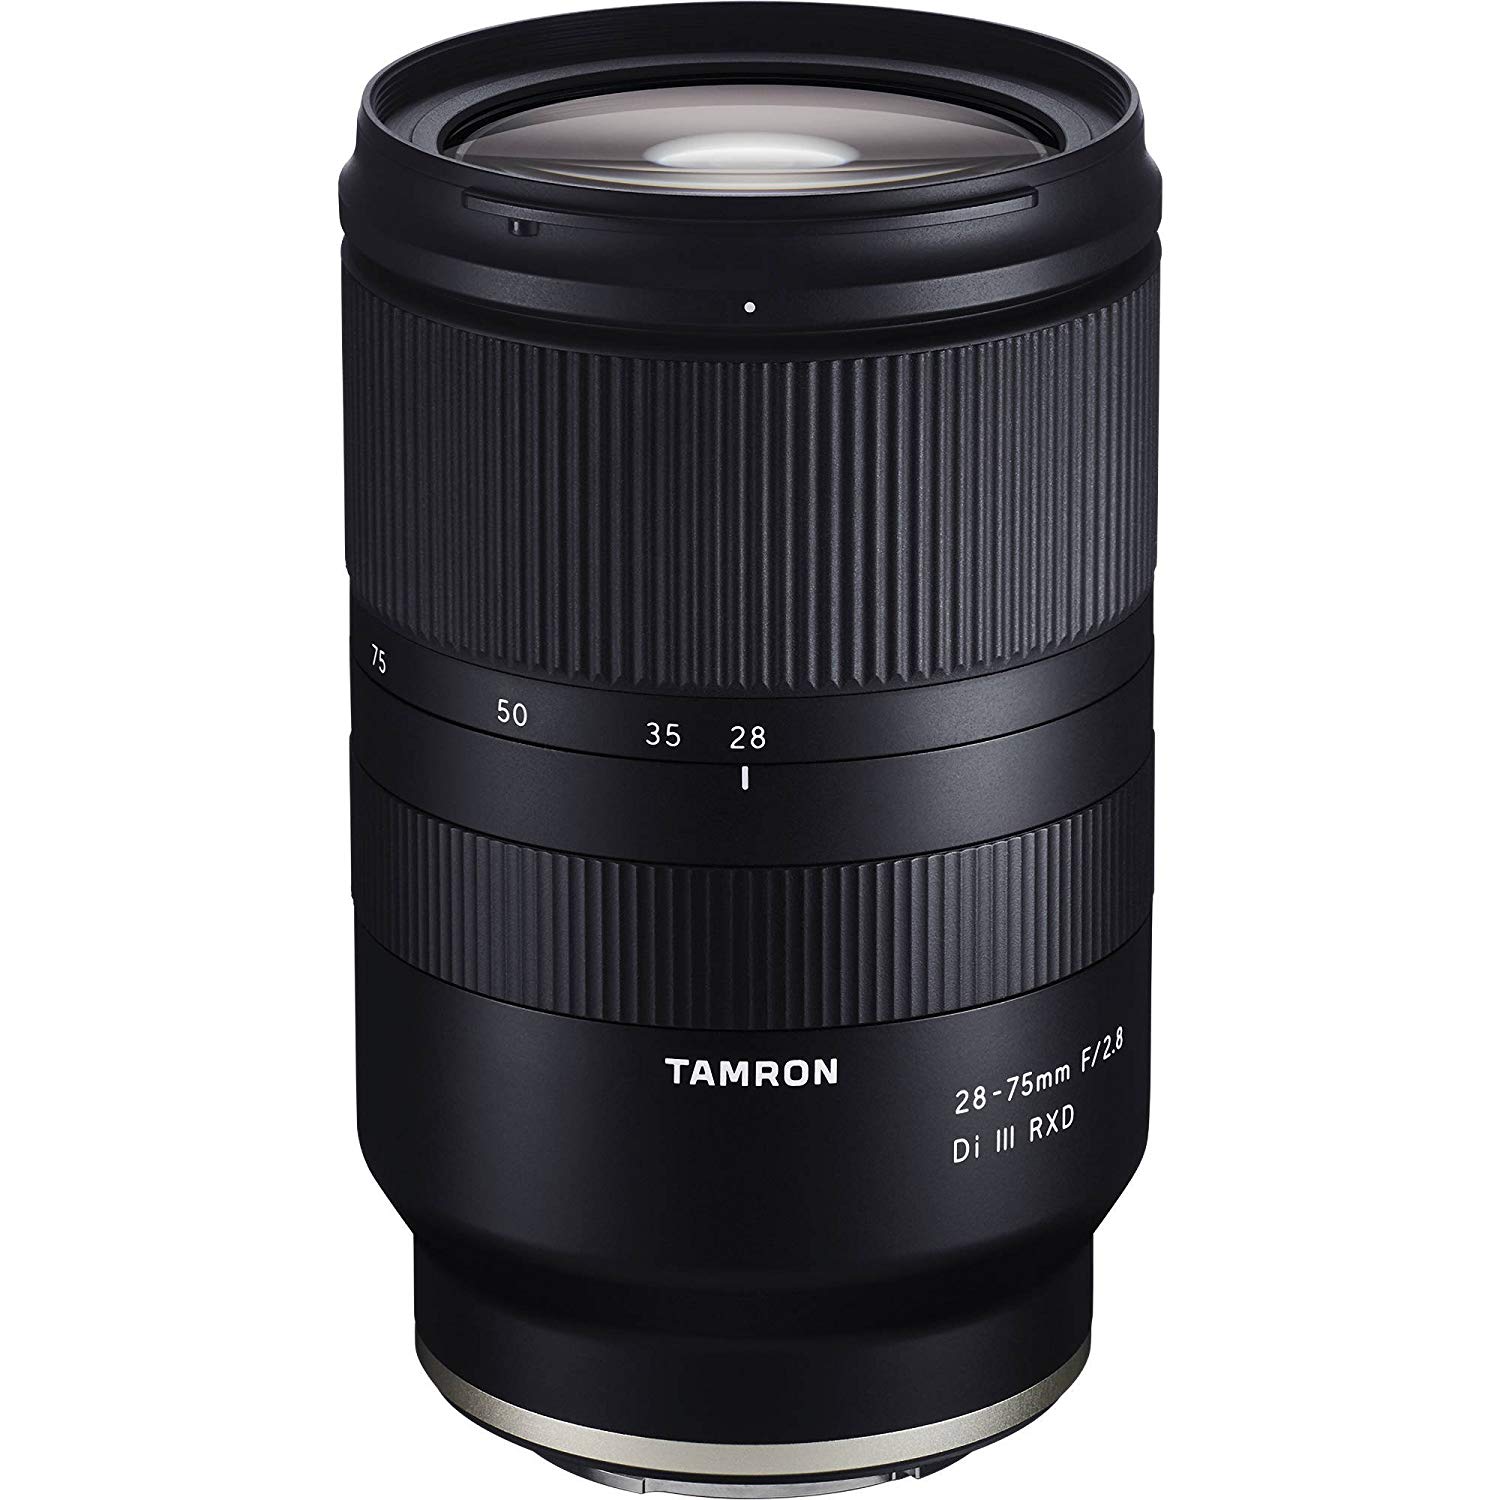 Tamron Di III RXD 28-75mm f/2.8 Lens for Sony E-Mount